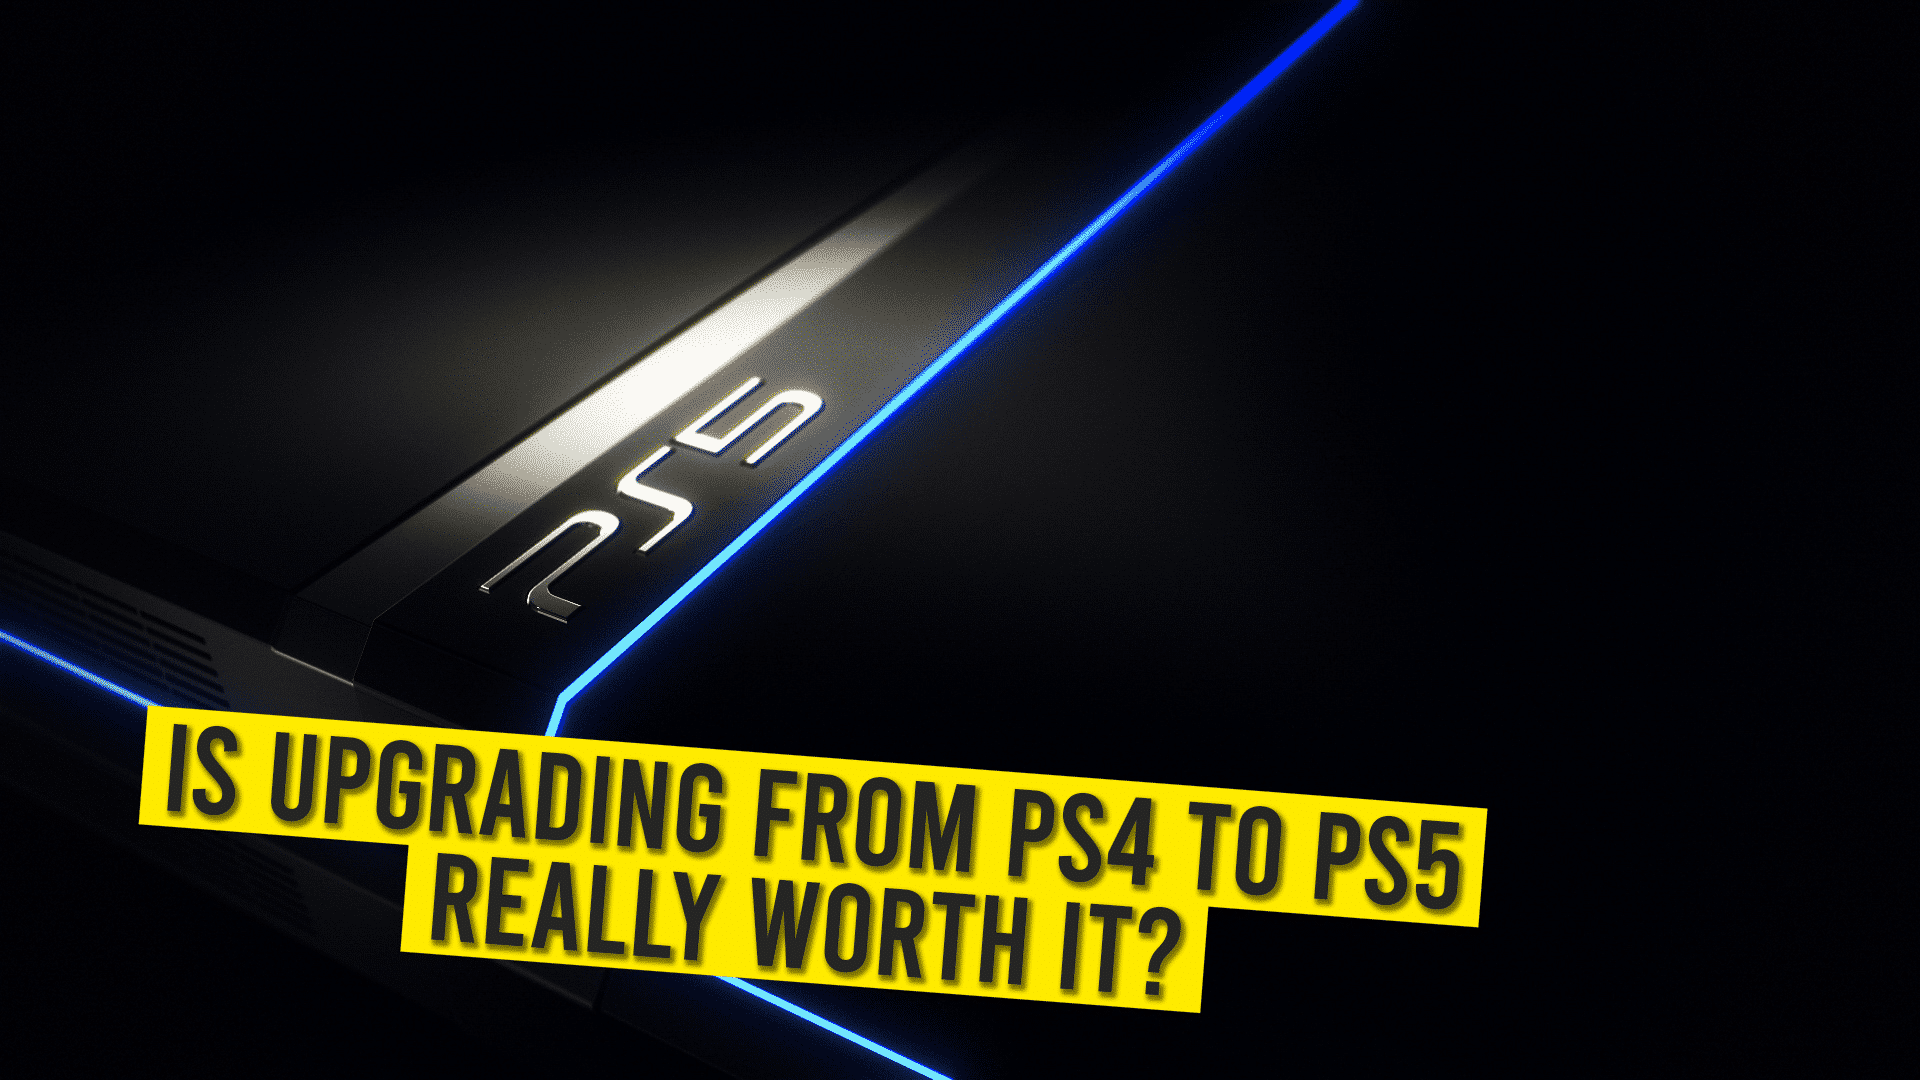 Is Upgrading From PS4 To PS5 Really Worth It?